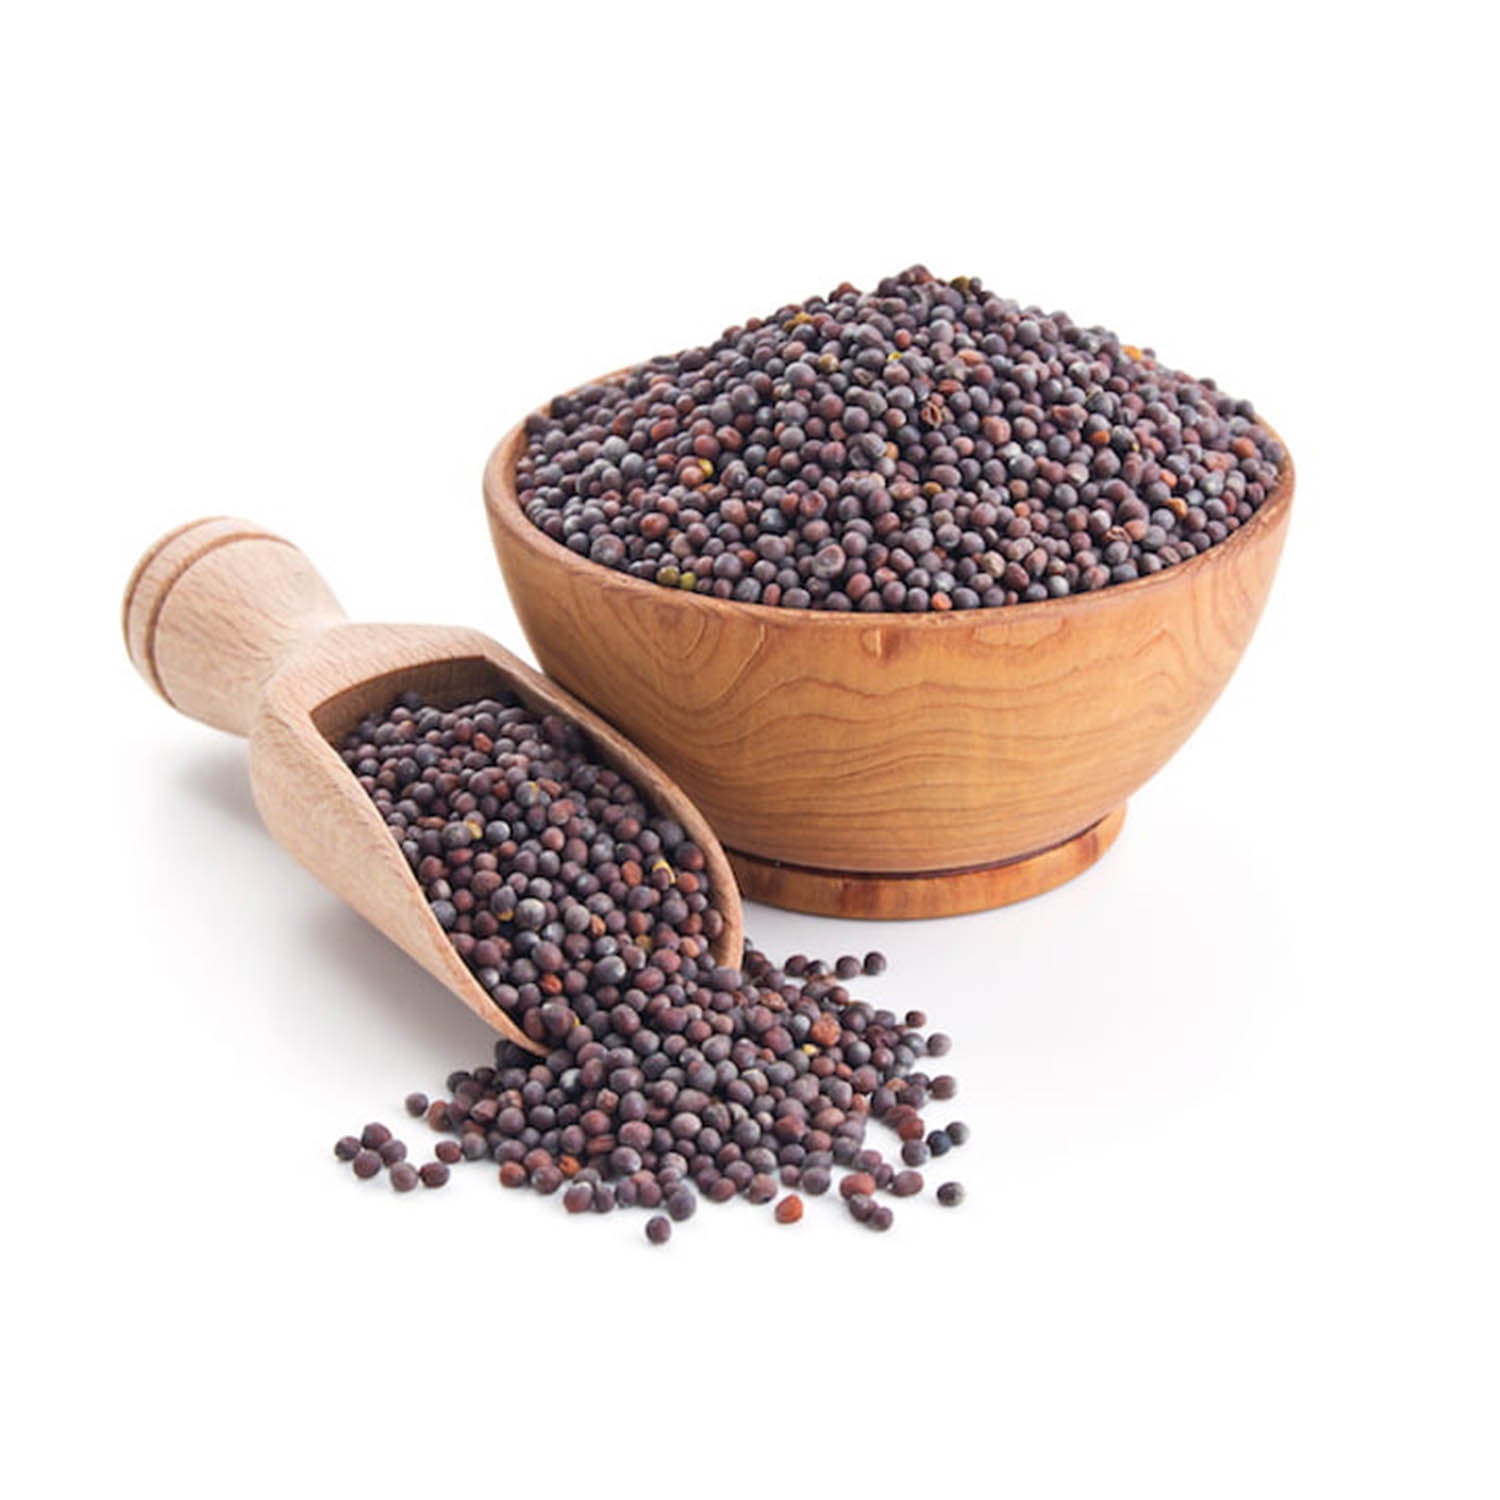 Milletamma’s Mustard seeds (black big) are Organic and are a good source for selenium.  It contains polyphenol compounds that have antioxidant and anti-inflammatory properties.  It protects against cancer and heart diseases.